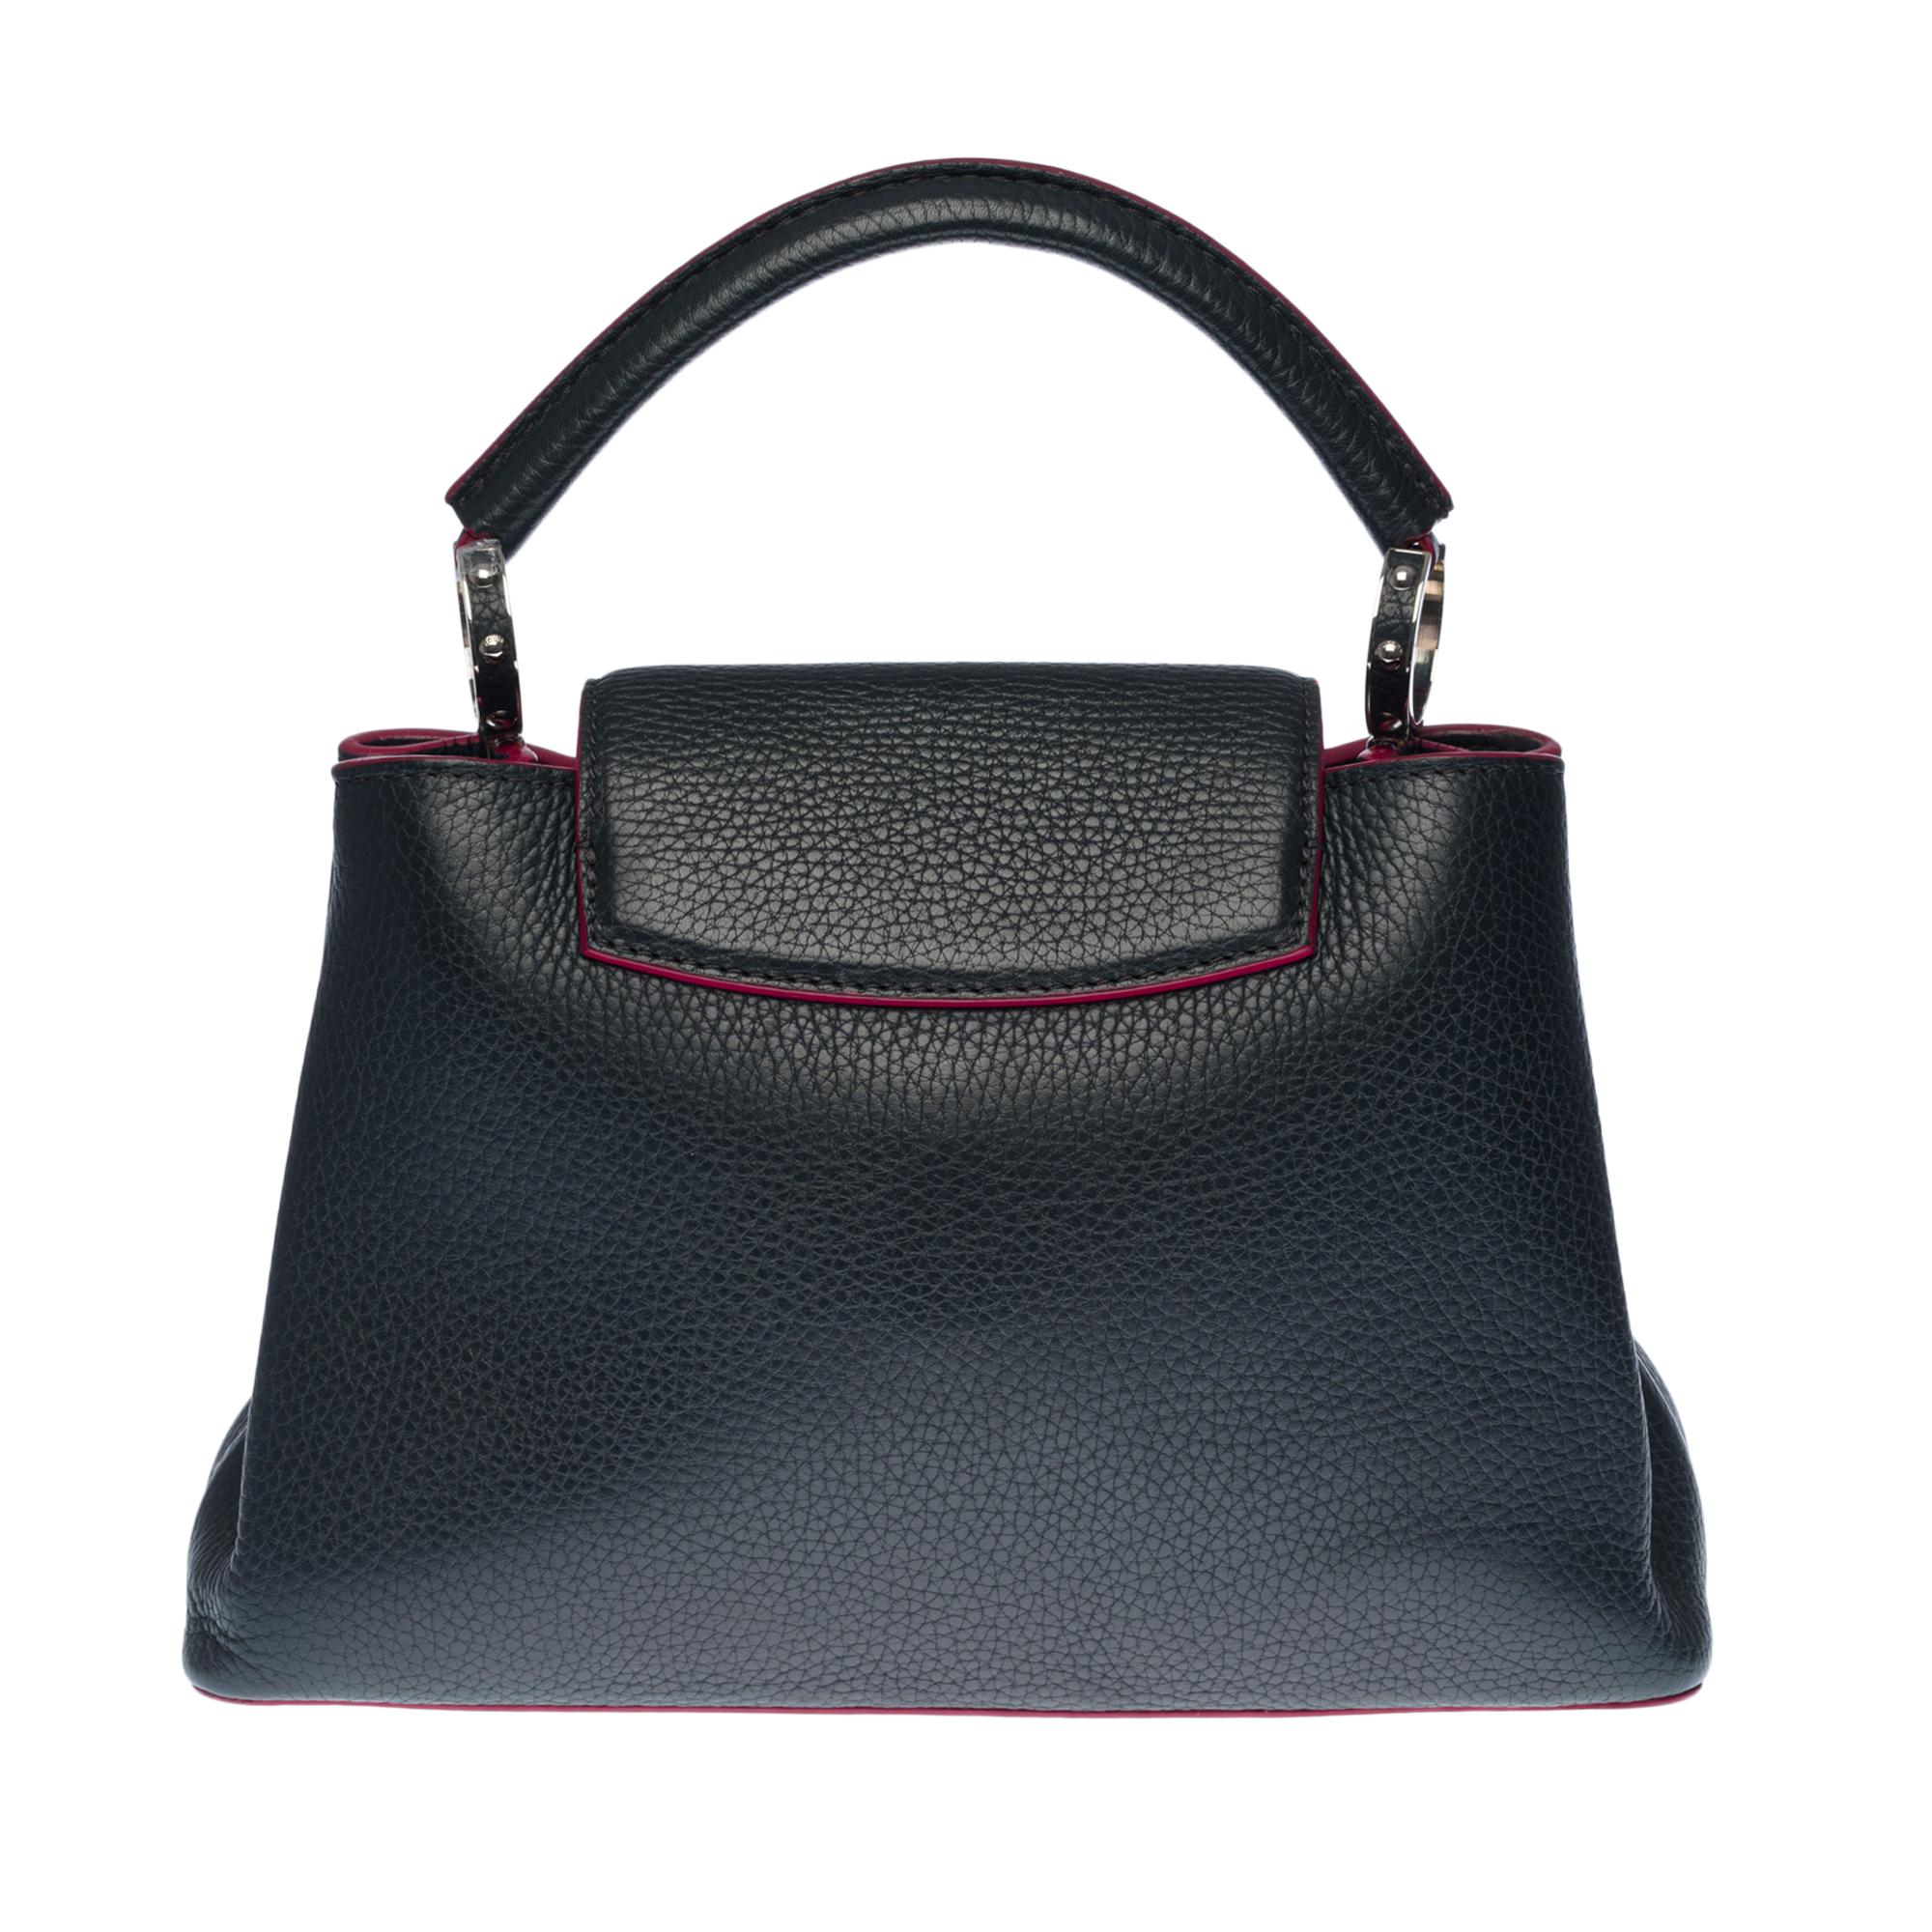 This Louis Vuitton Capucines BB two-tone limited edition bag is made of navy blue Taurillon leather with red sliced edges, silver metal trim. The upper handle is in navy blue Taurillon leather

Details
27 x 18 x 9 cm - 10.62 * 7.08 * 3.54